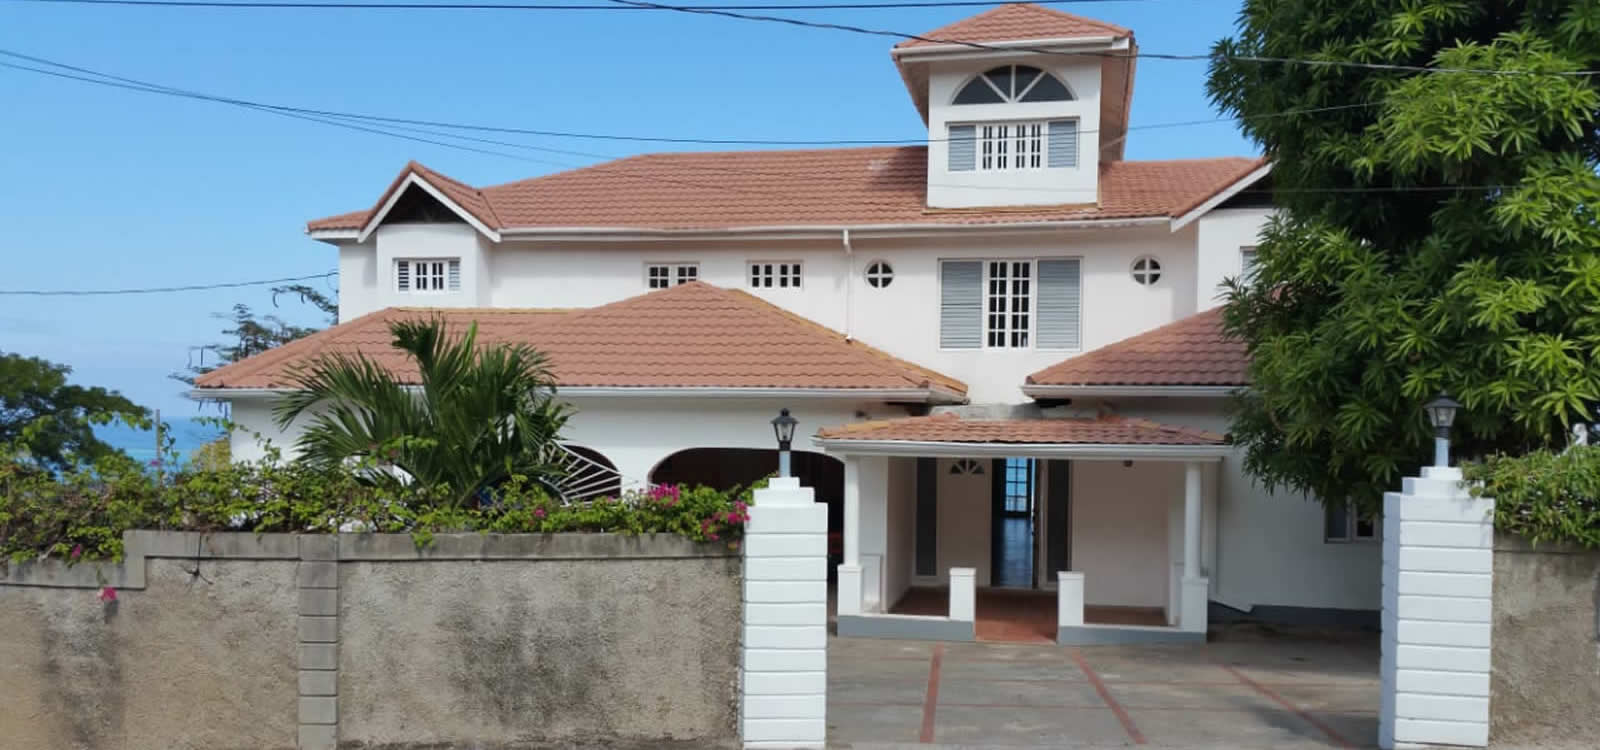 5 Bedroom Home For Sale Discovery Bay St Ann Jamaica 7th